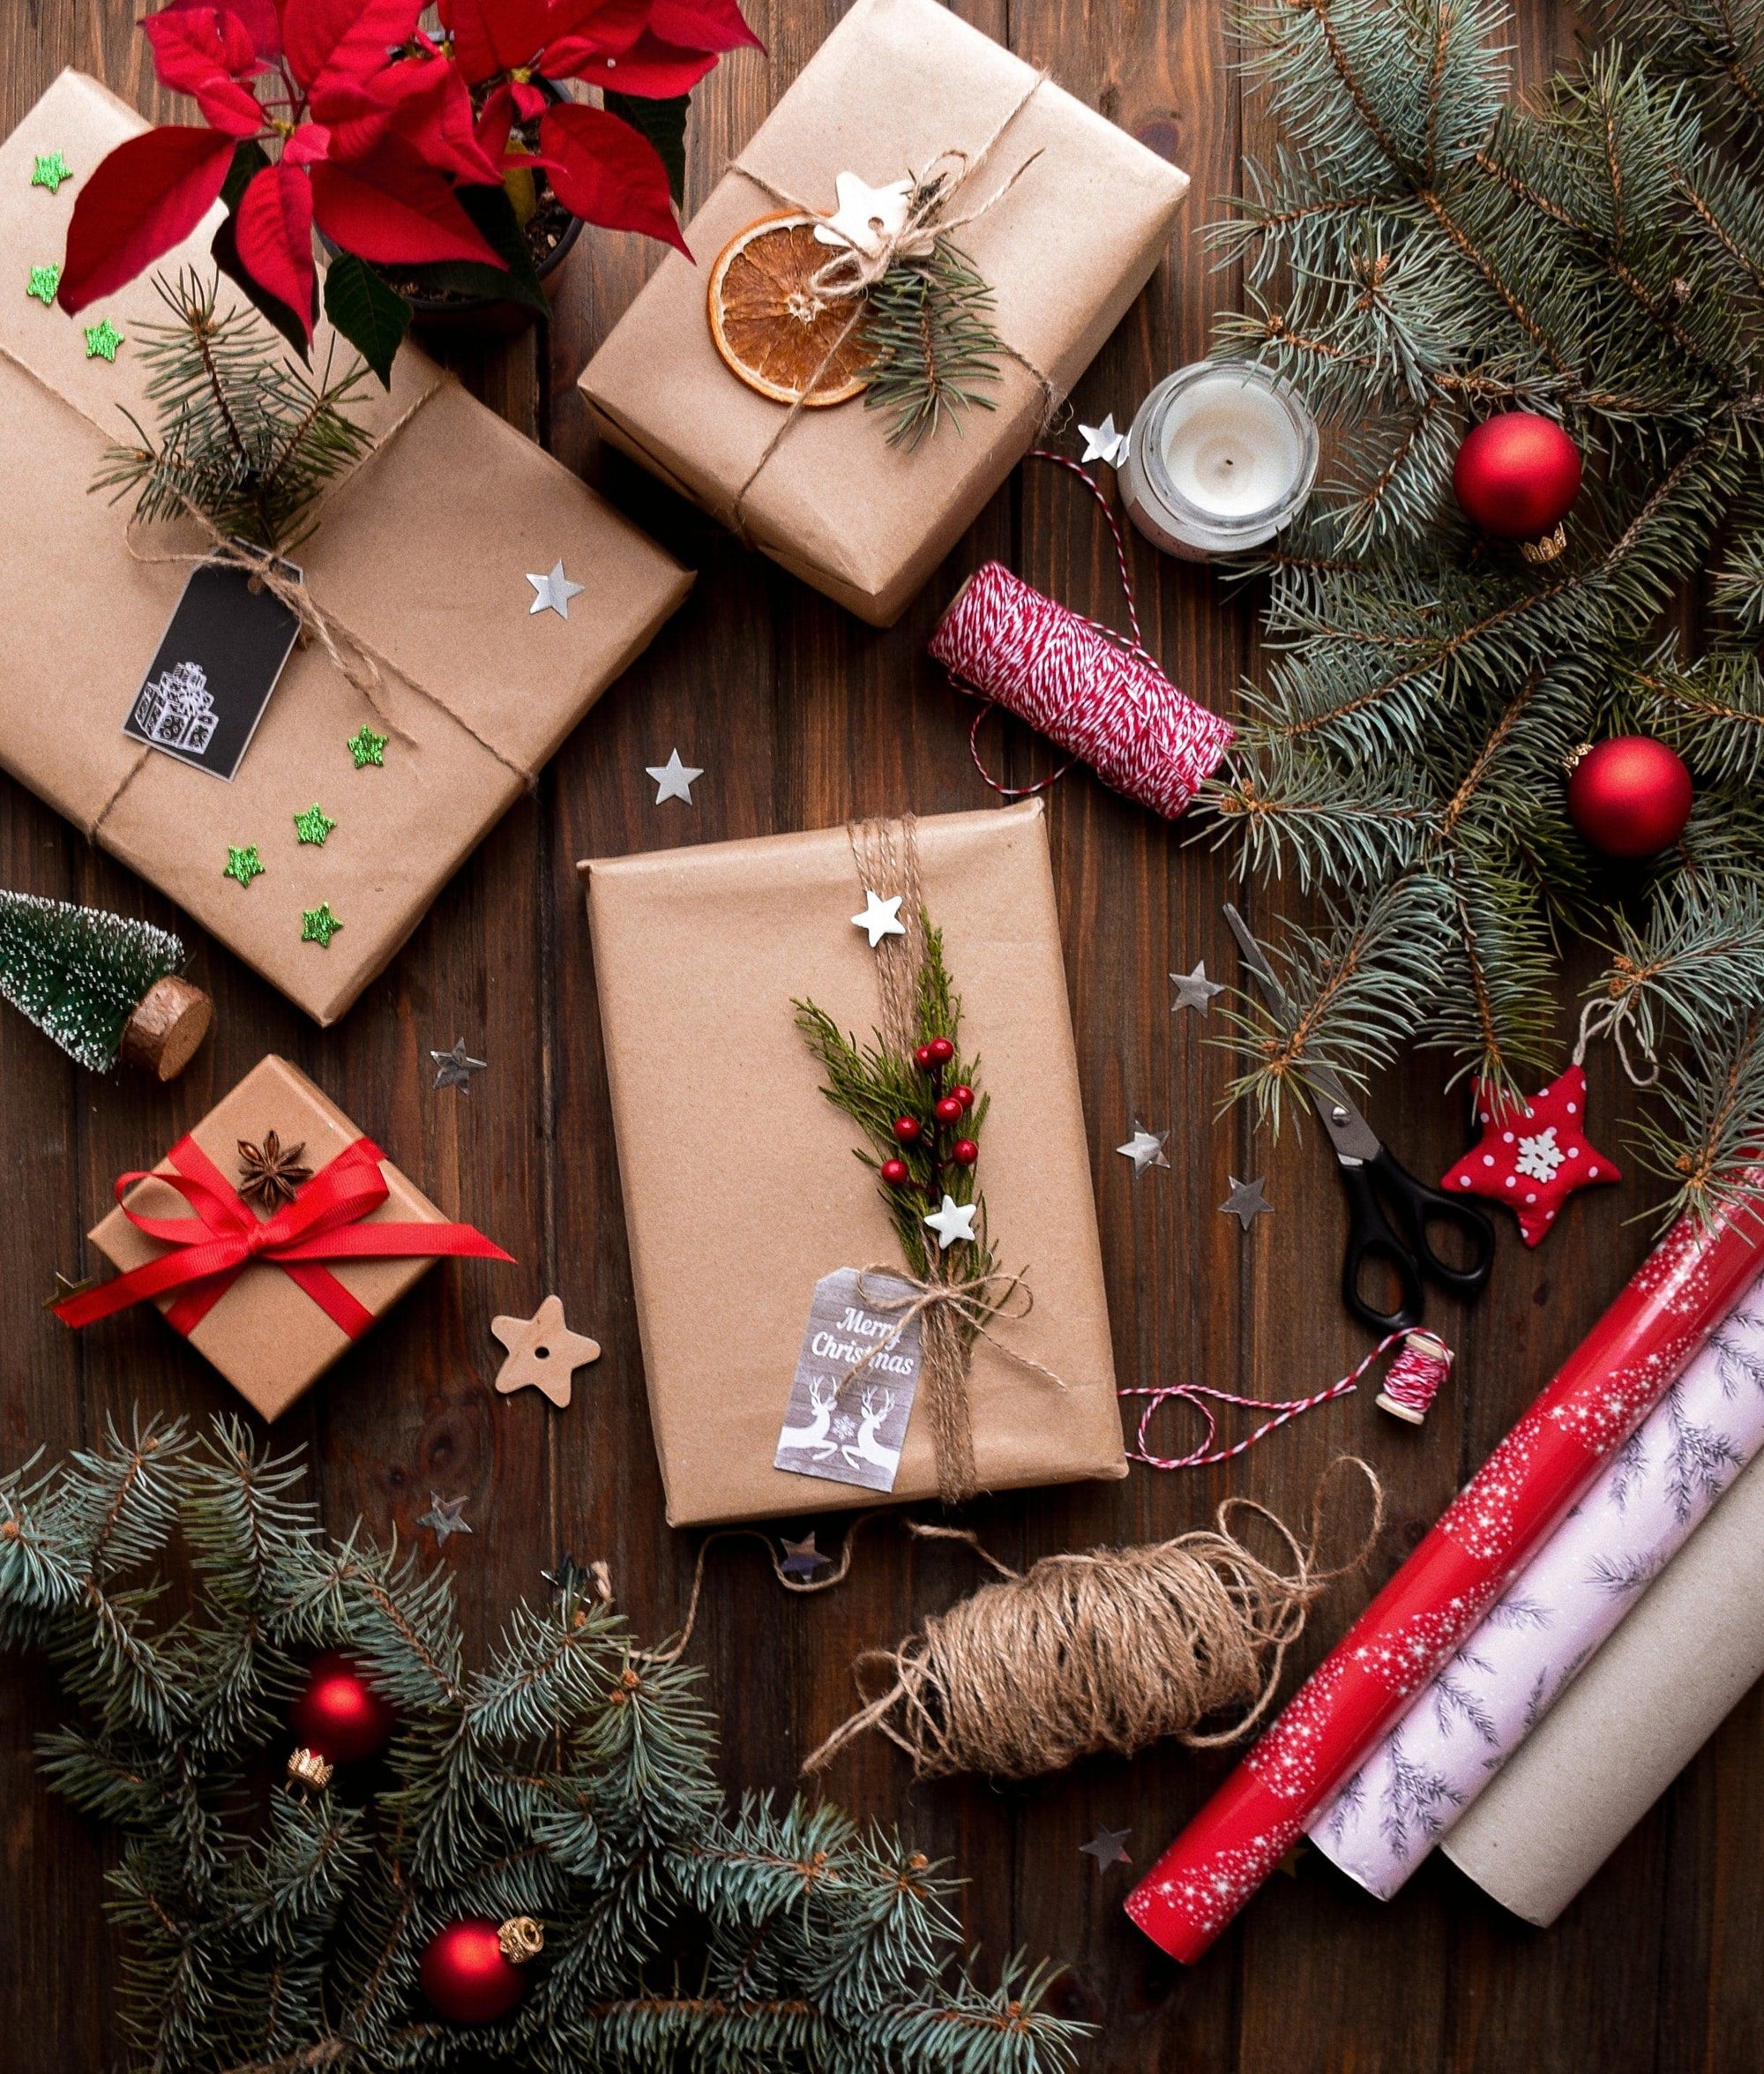 5 Best Rustic Gifts for the Holidays - A Rustic Feeling